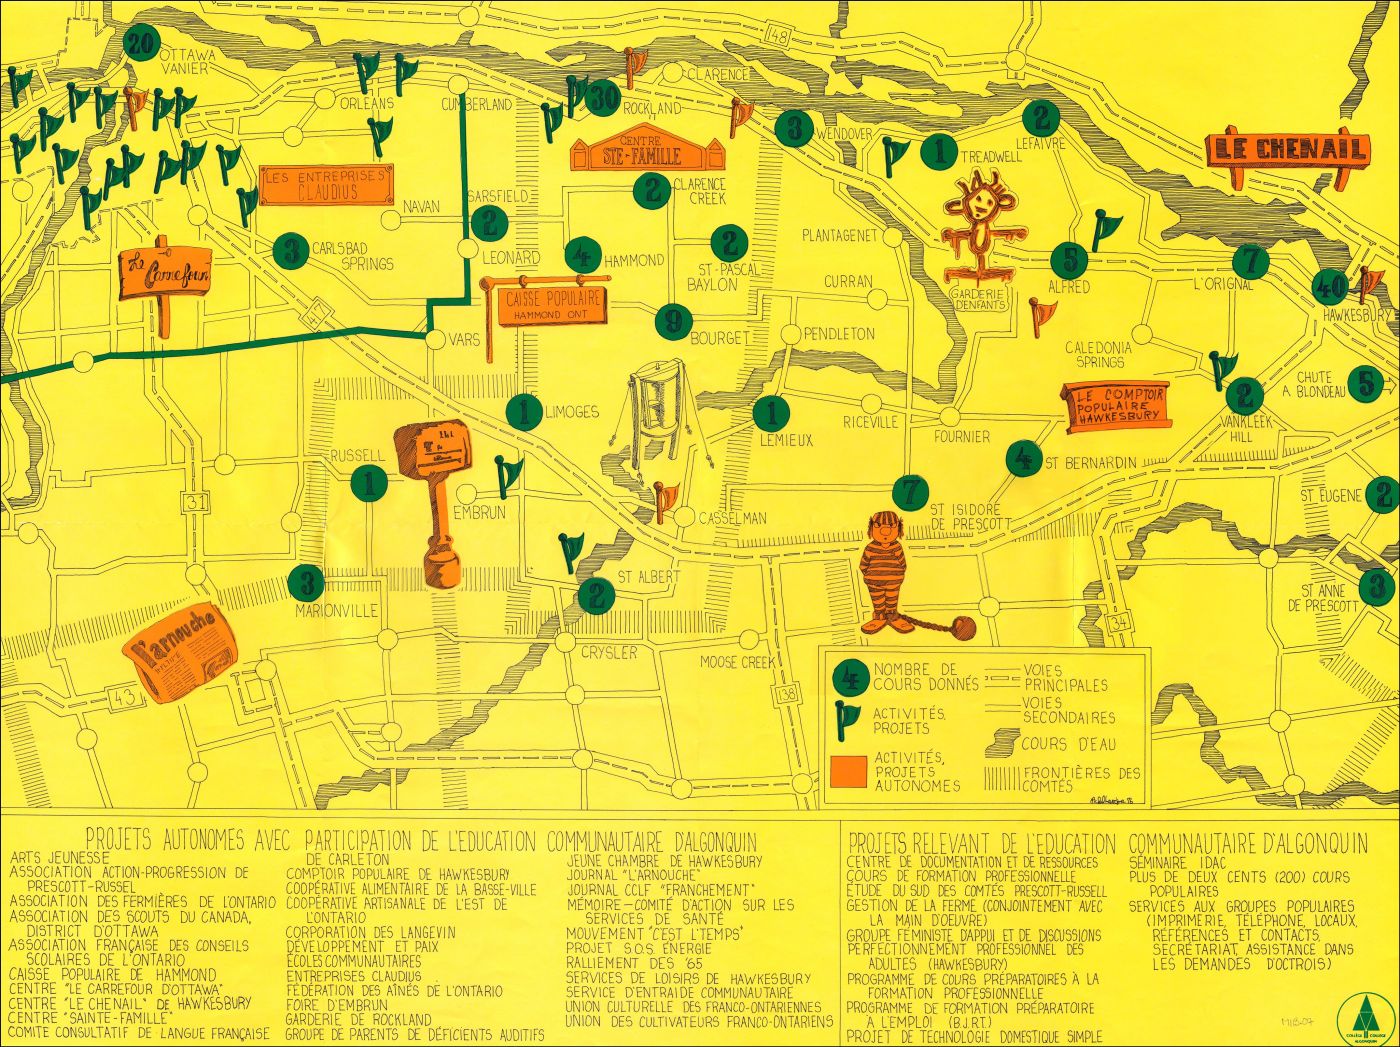 " A schematic map in French. Fine black lines on a yellow background represent the road network and the main communities in eastern Ontario, including Ottawa. Coloured symbols mark the sites of intervention by the “éducation communautaire d’Algonquin” program. A detailed list of projects appears at the bottom of the map."